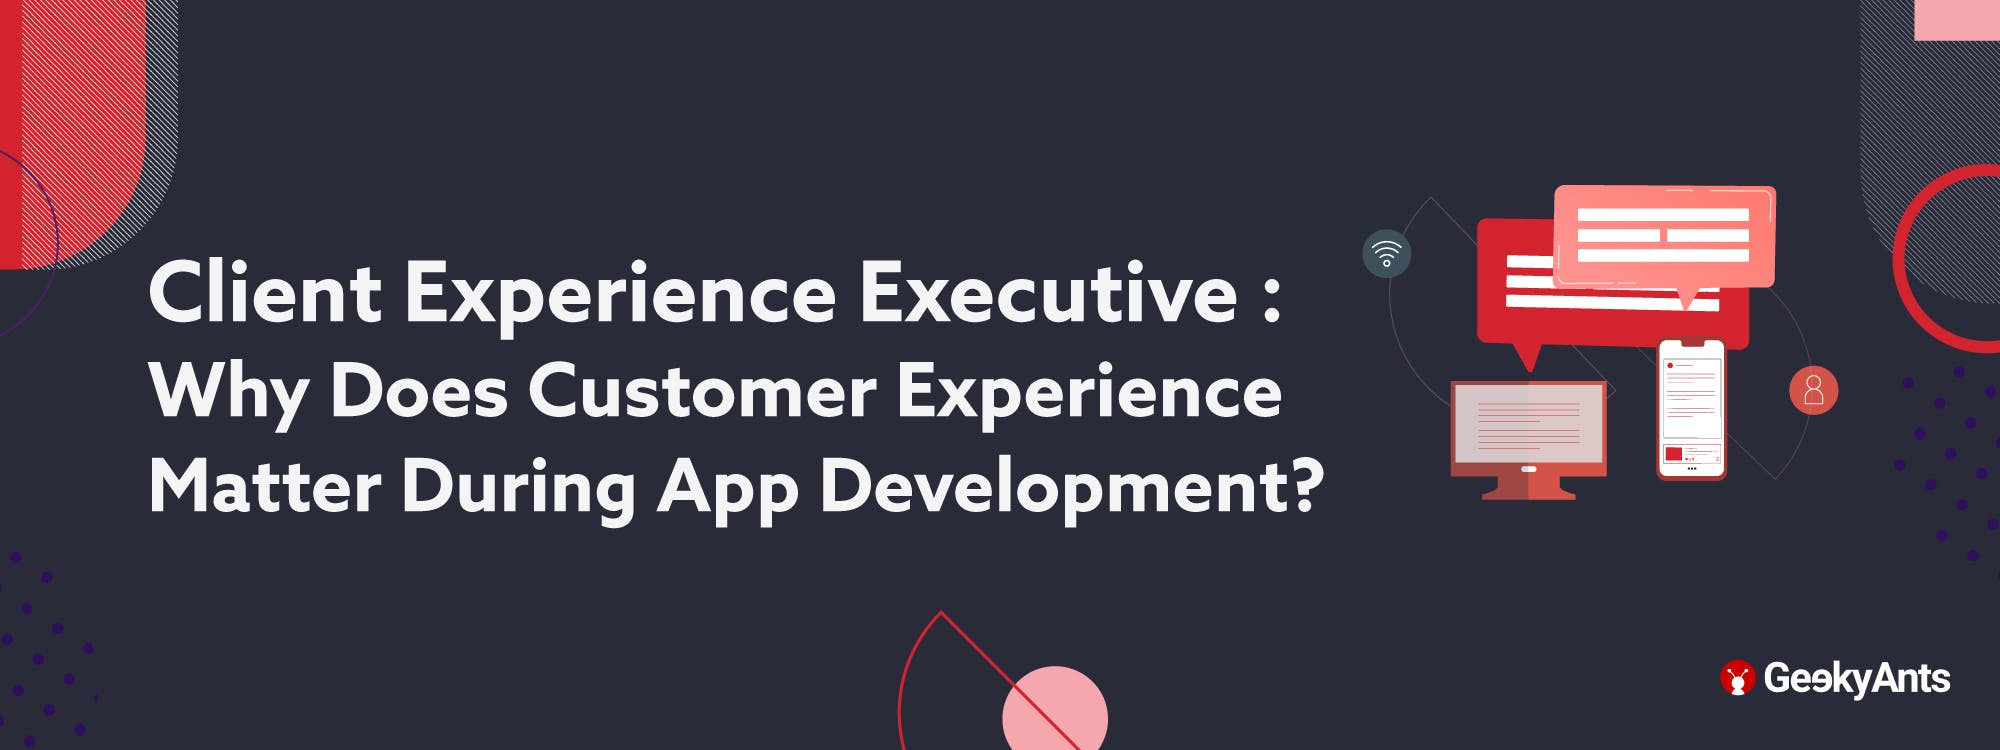 Client Experience Executive : Why Does Customer Experience Matter During App Development?